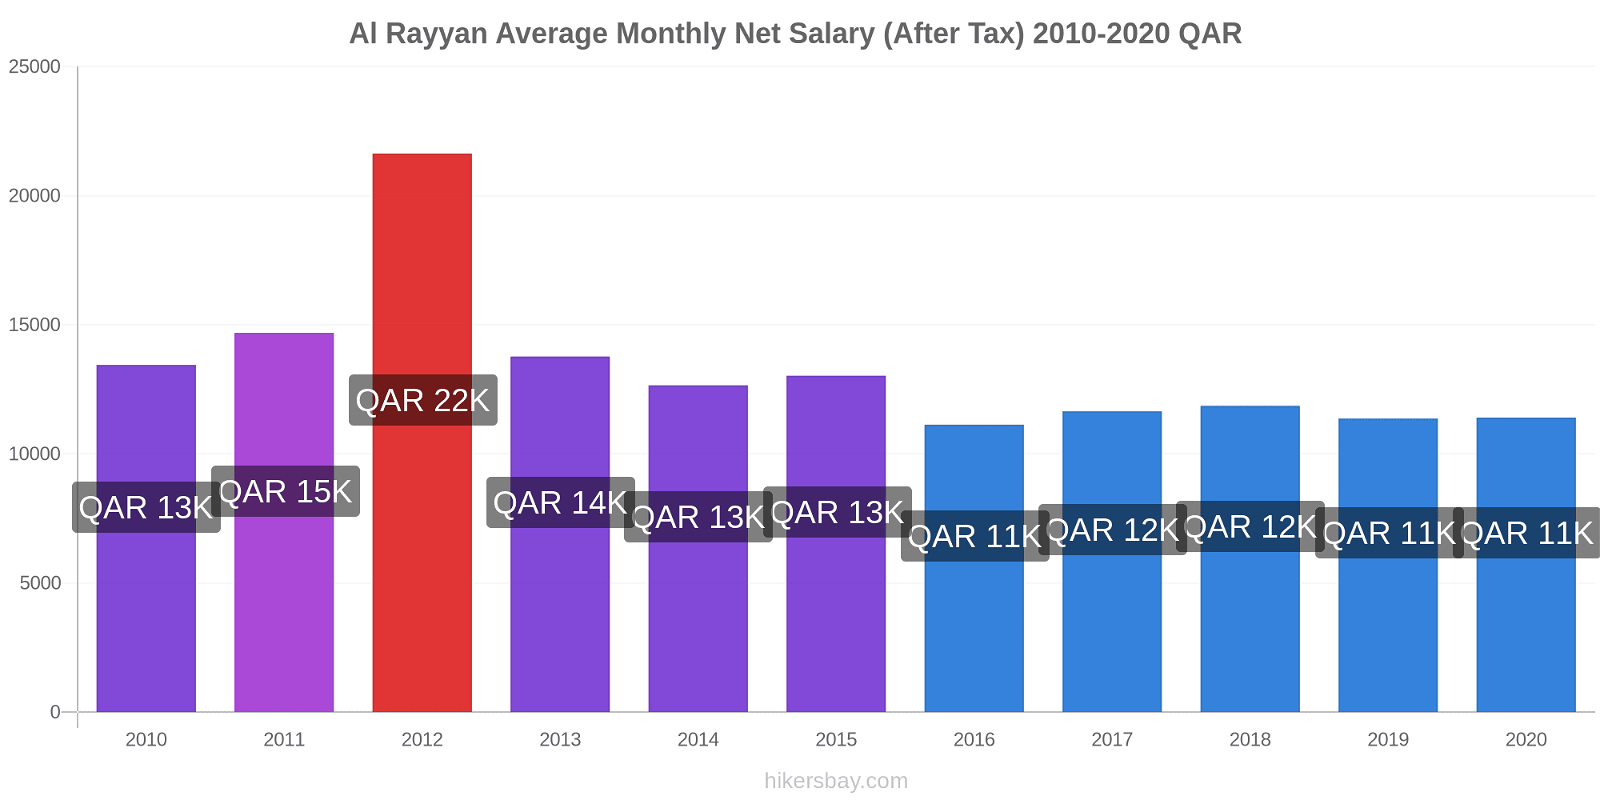 Al Rayyan price changes Average Monthly Net Salary (After Tax) hikersbay.com